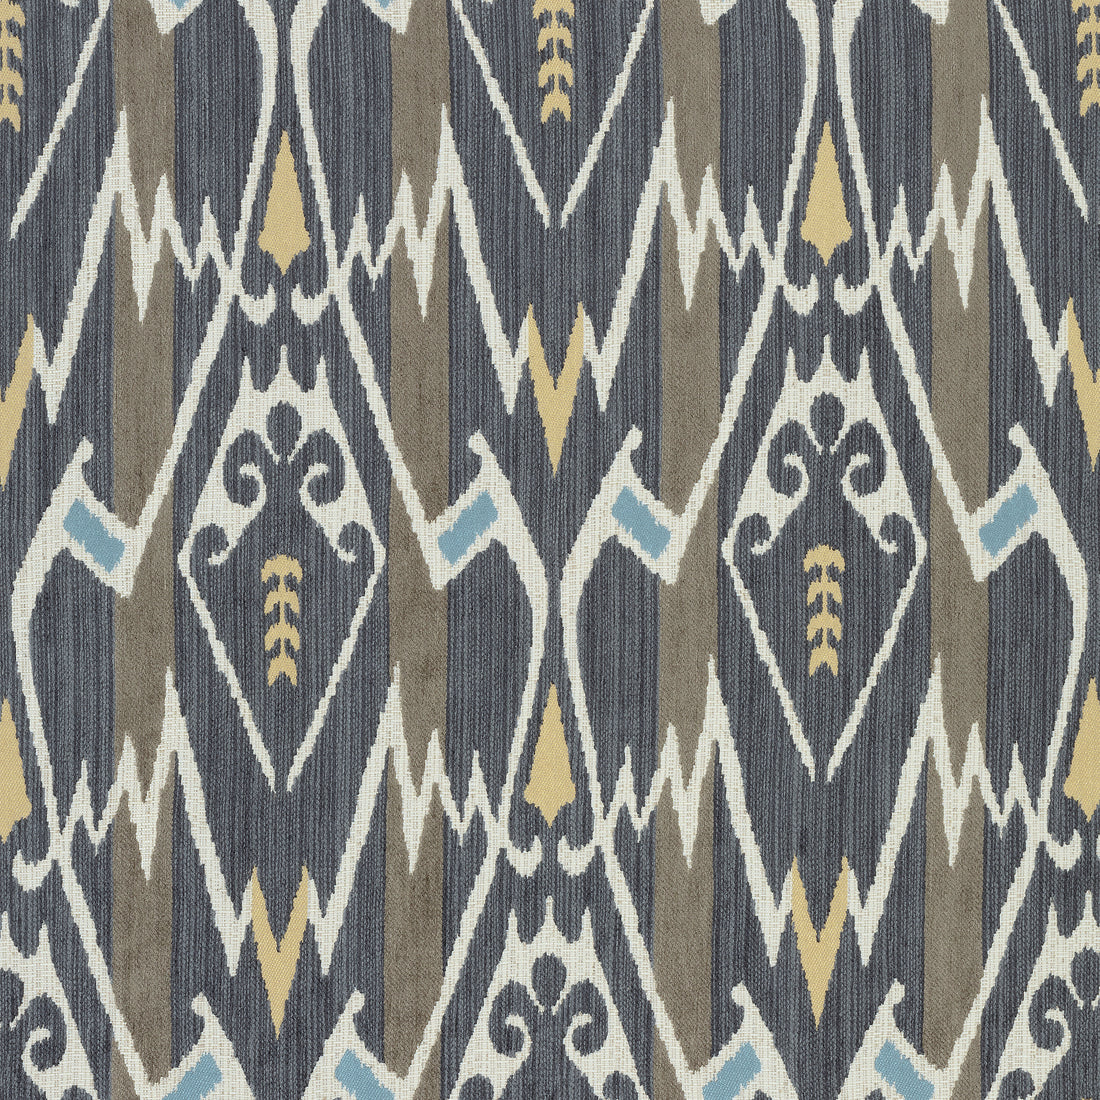 Nomad fabric in charcoal color - pattern number W73366 - by Thibaut in the Nomad collection